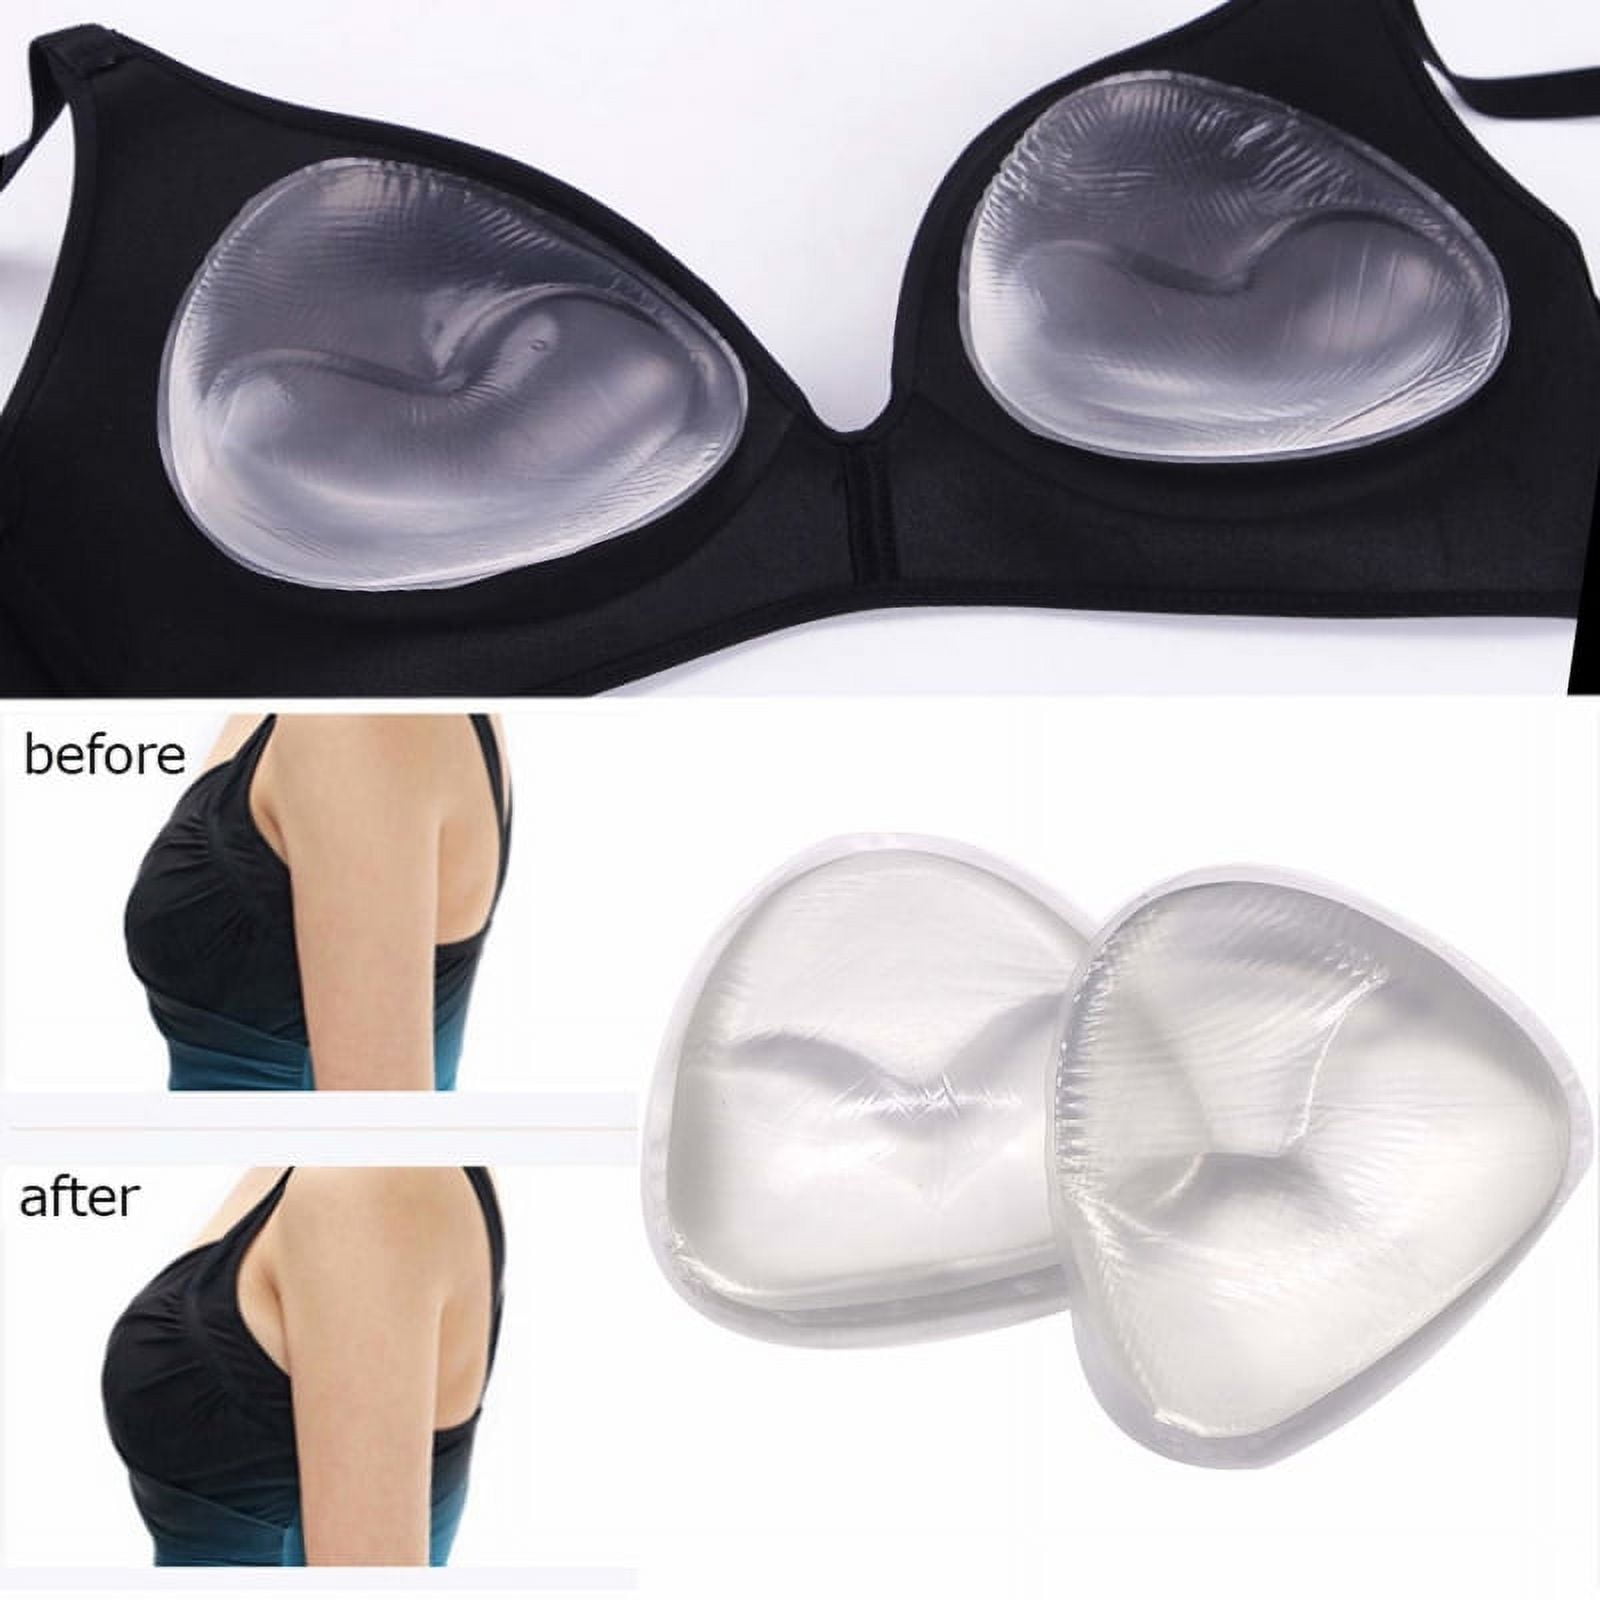 Breast Pad 1 Pair 8CM Sexy Thick Latex Bra Pads Breast Insert Push Up Bra  Enhancer Swimsuit Bikini Padded Removeable Chest Accessories 230615